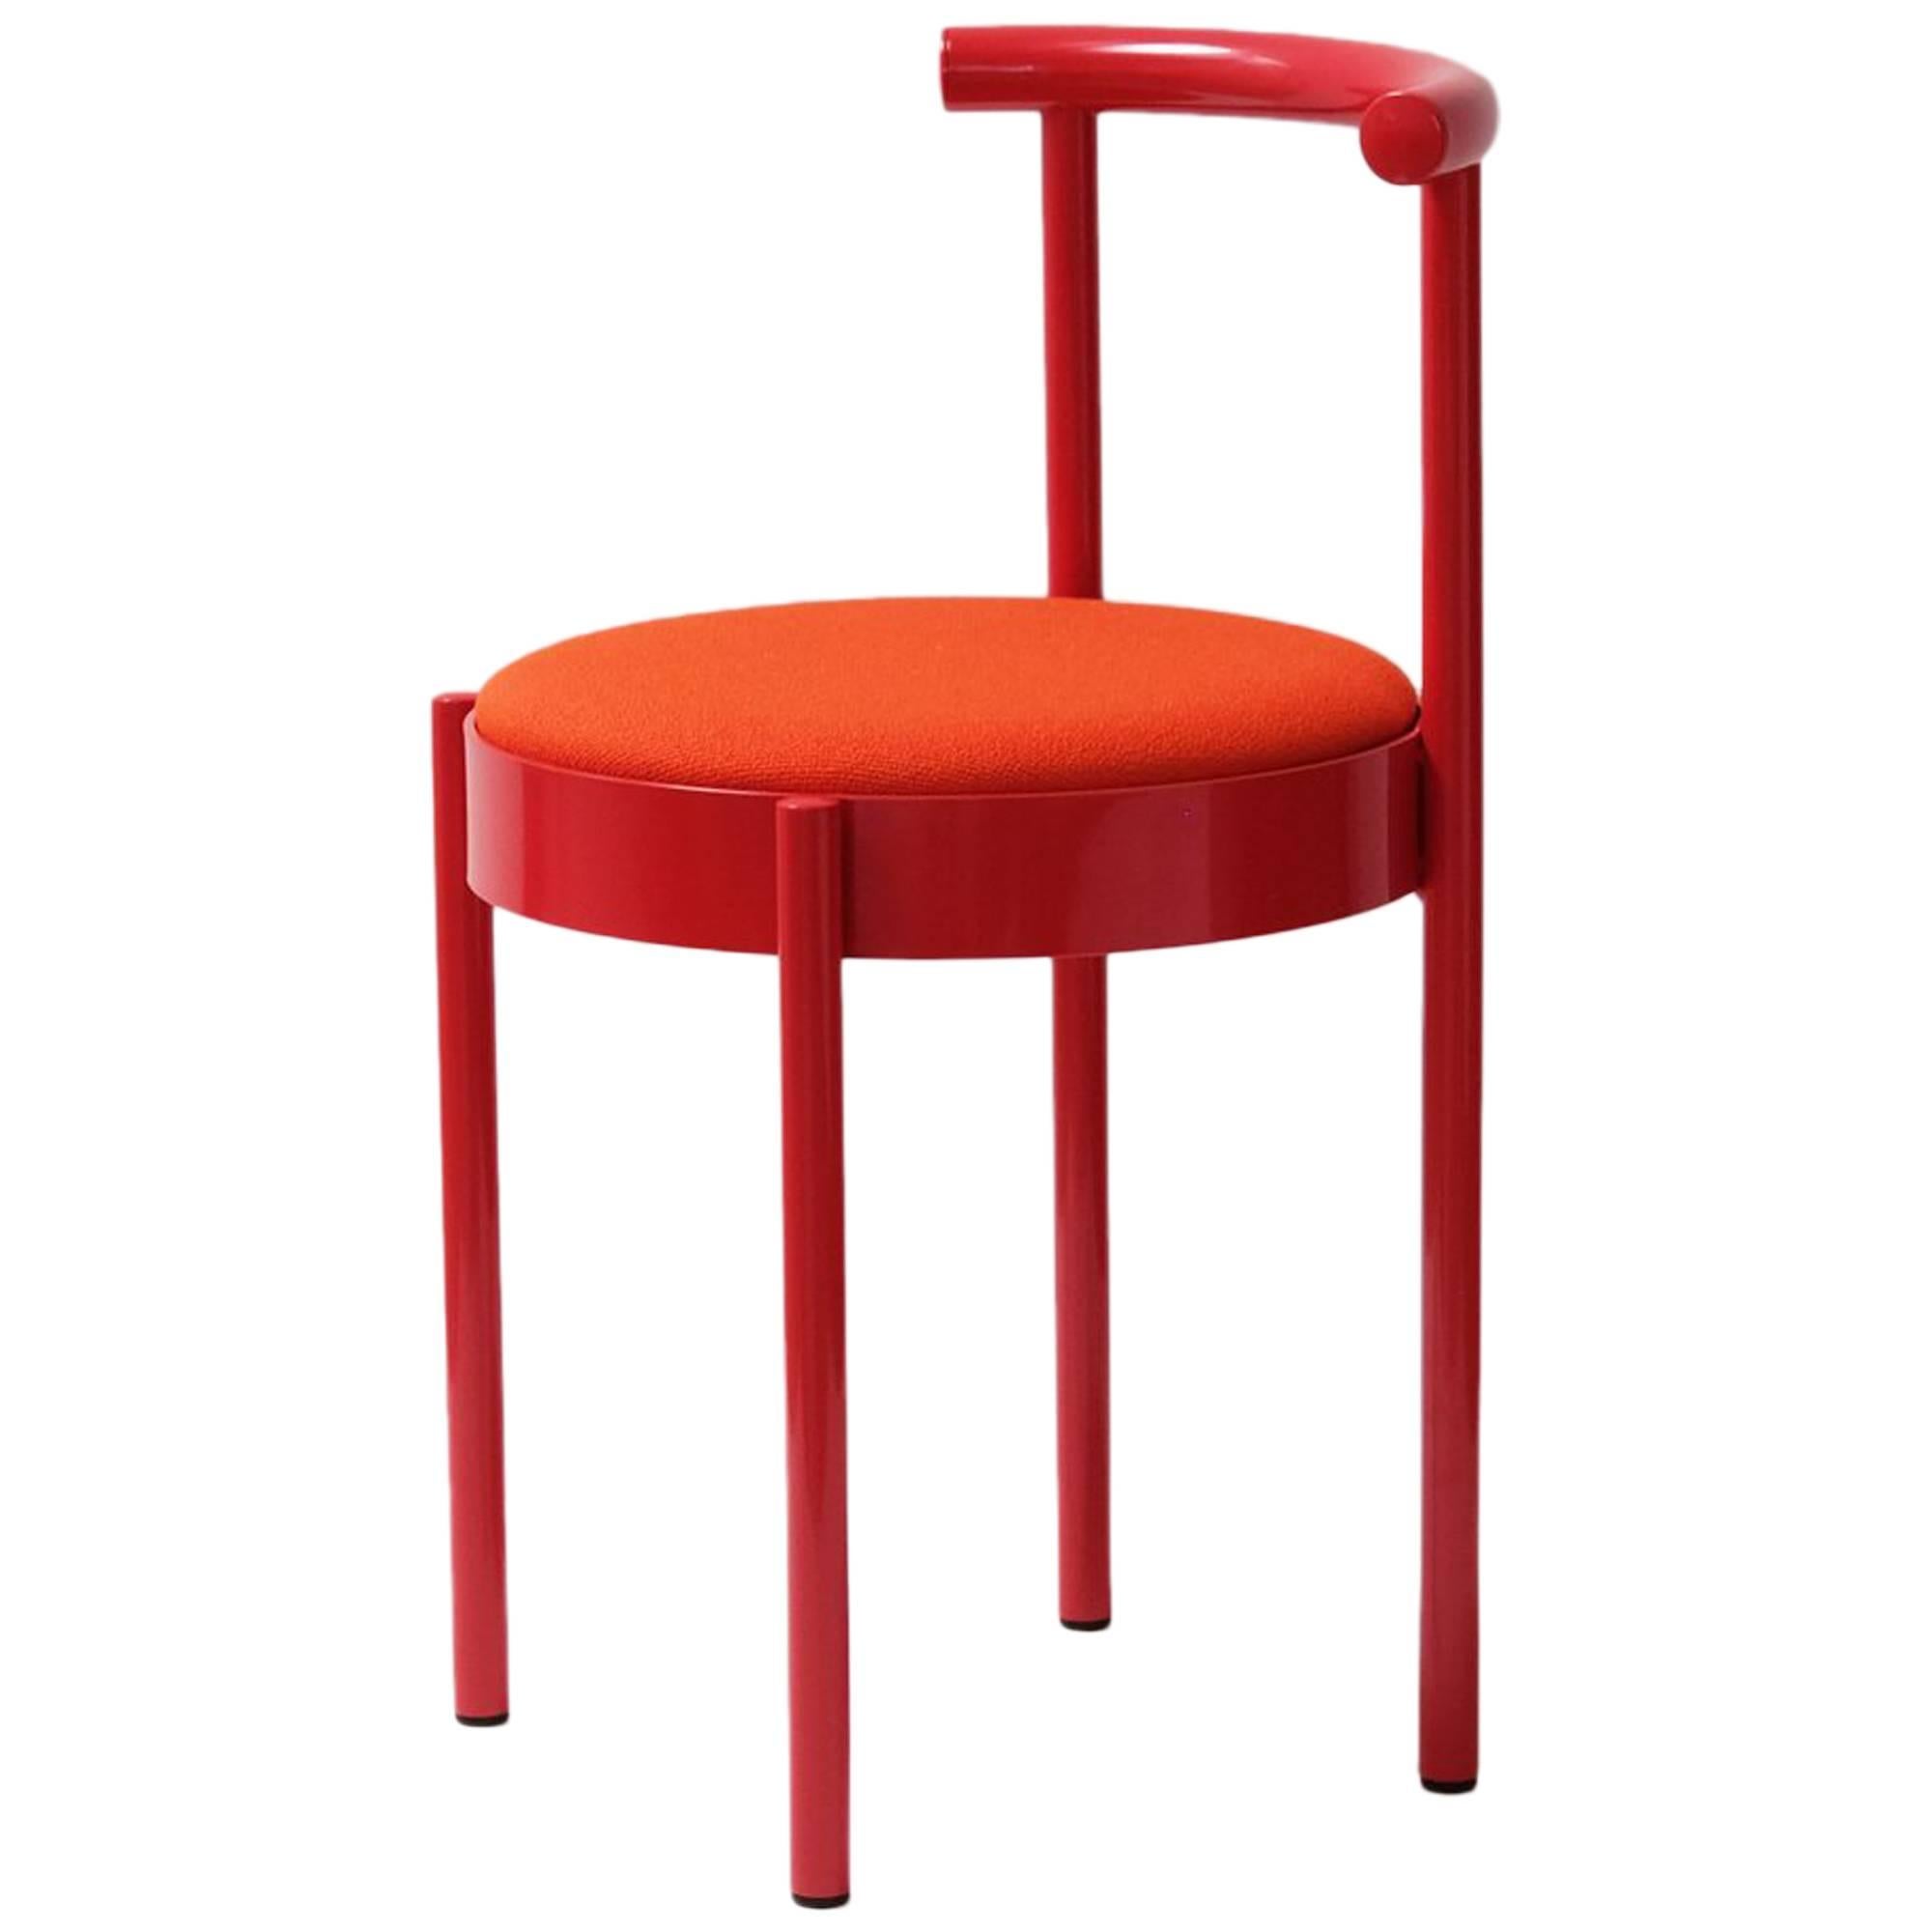 Soft Red Chair by Daniel Emma, Made in Australia For Sale